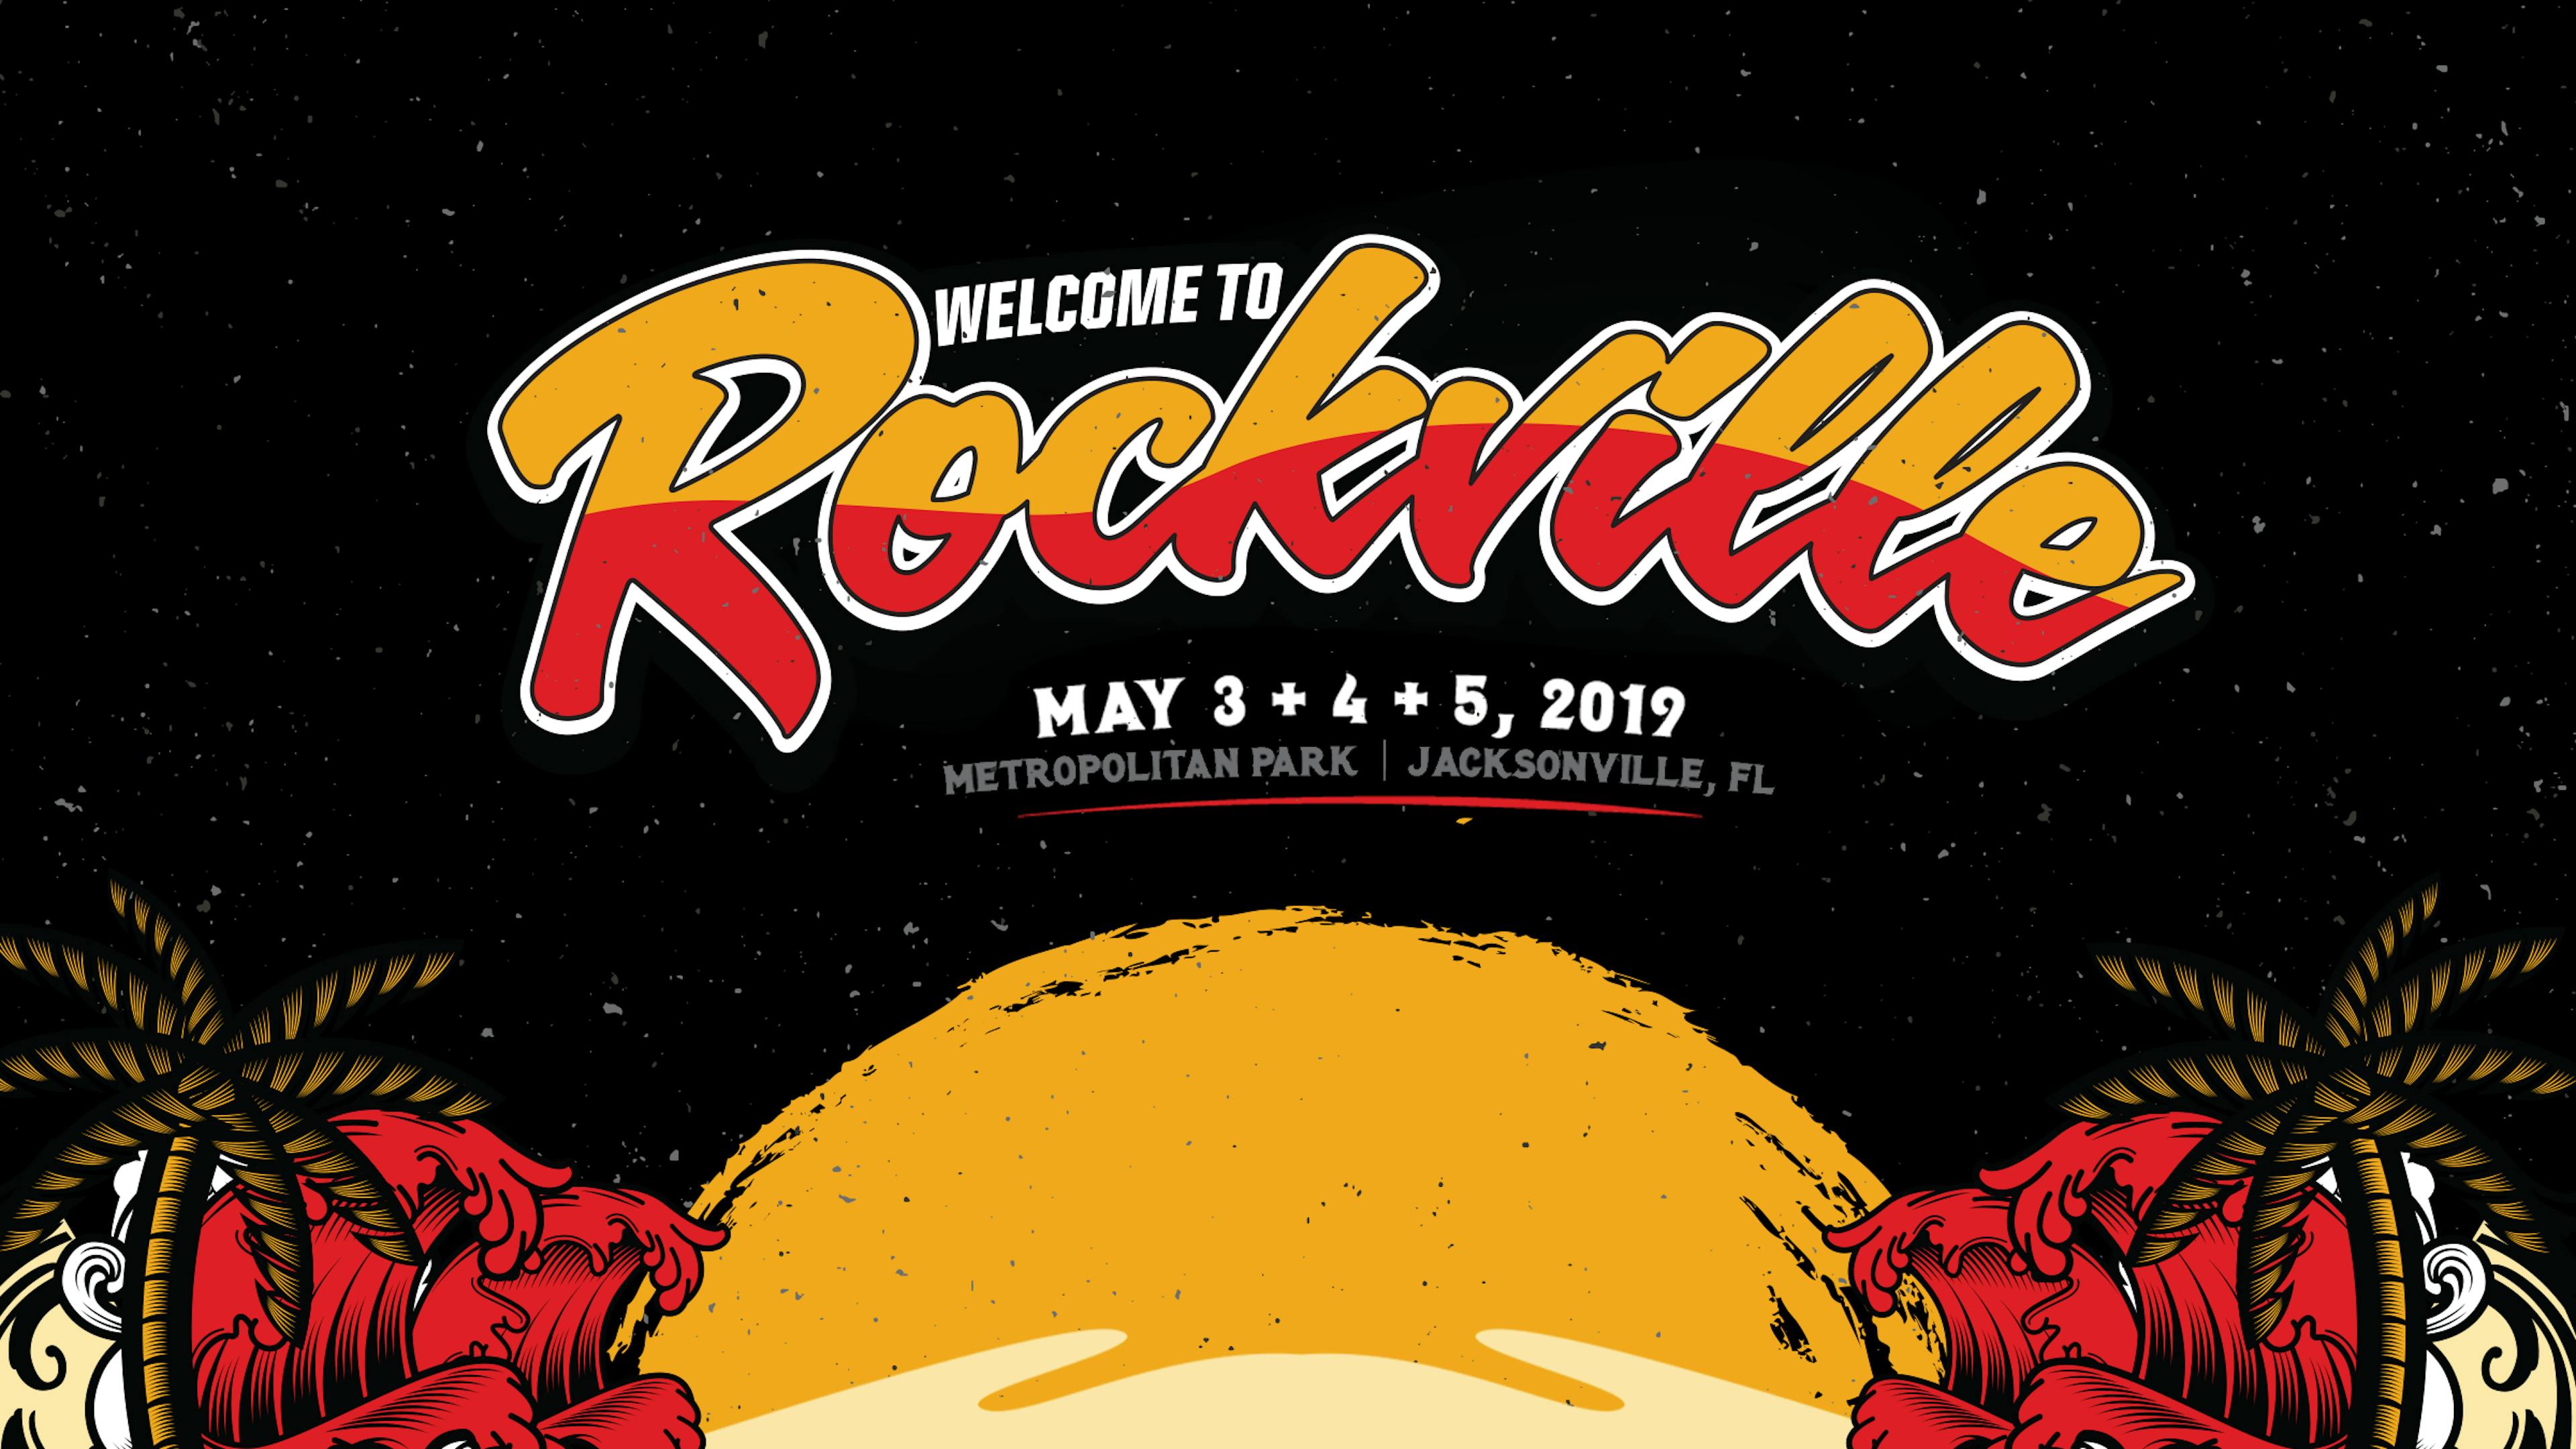 Tool, Korn, Rob Zombie, Incubus, And More Announced For Welcome To Rockville 2019